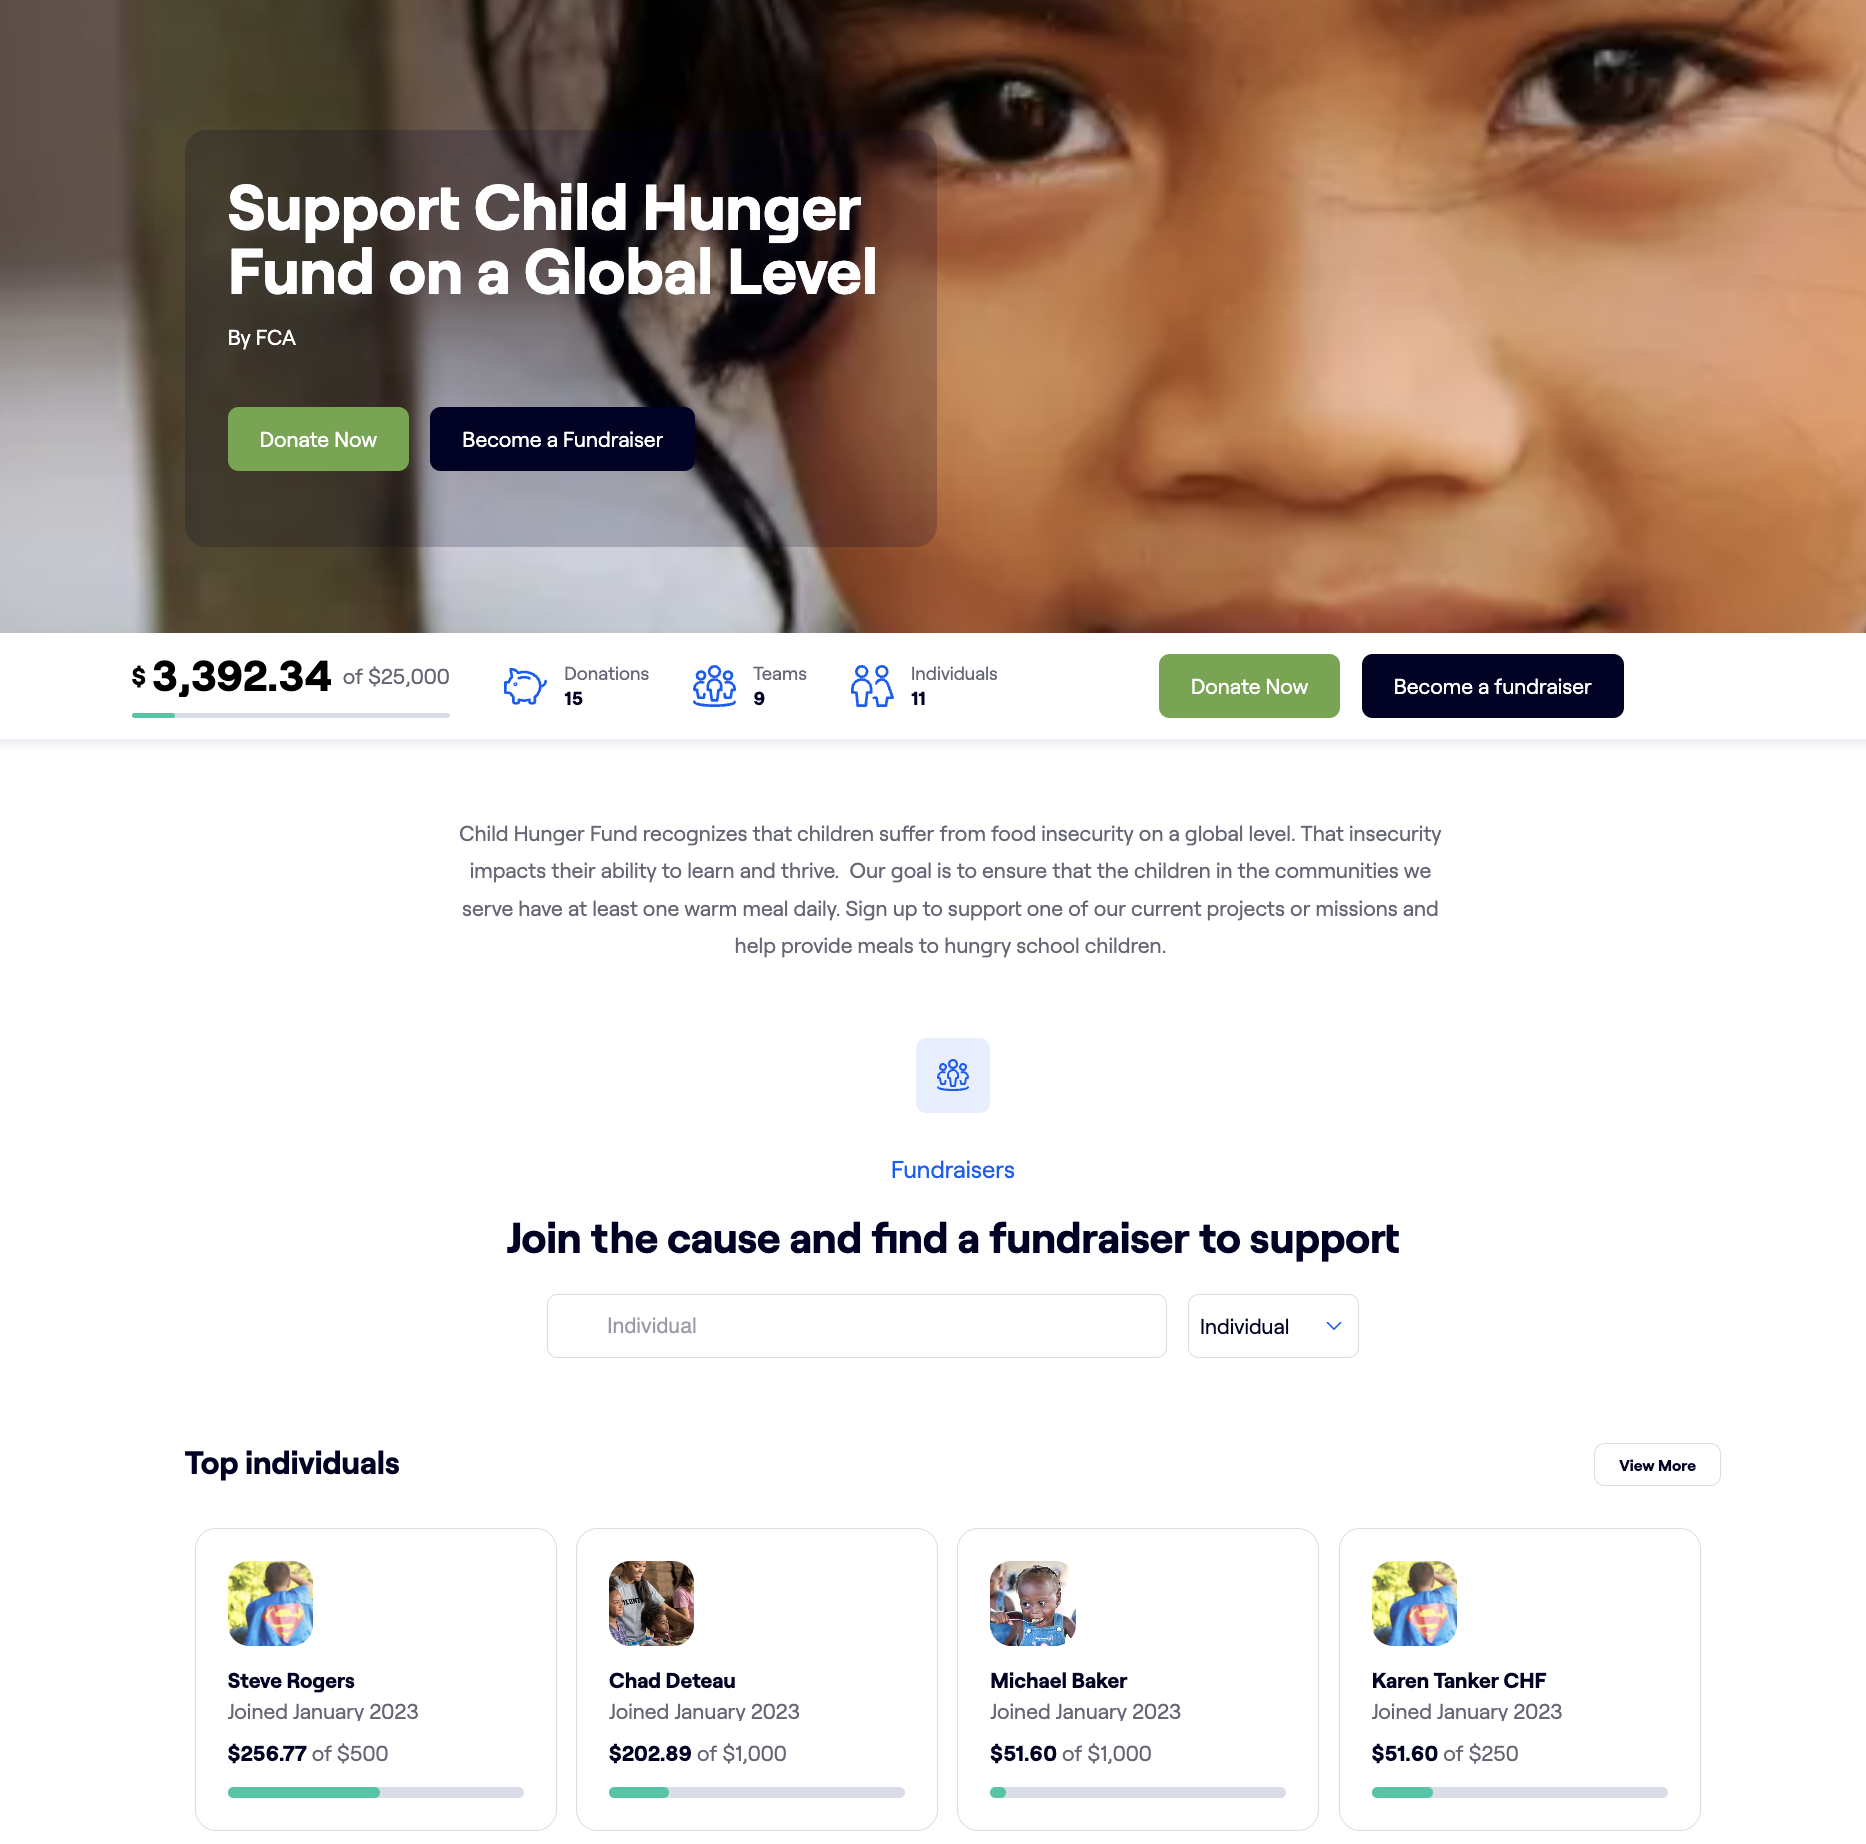 iD Product_P2P_Campaign Page_Child Hunger